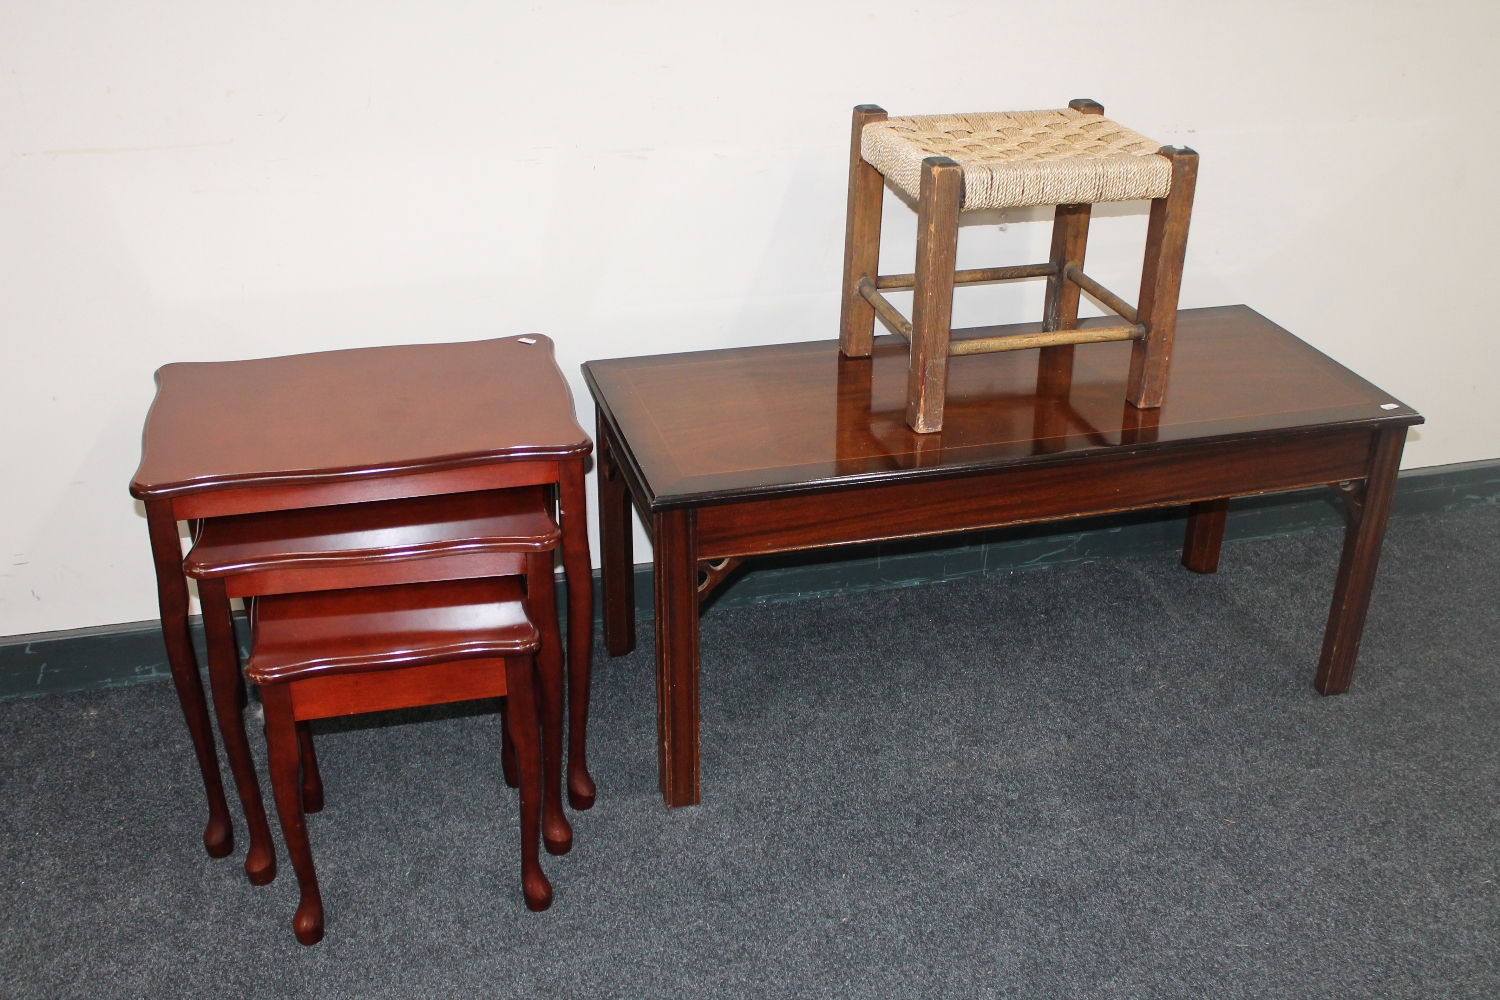 An inlaid mahogany coffee table together with a nest of three tables and a rush seated stool